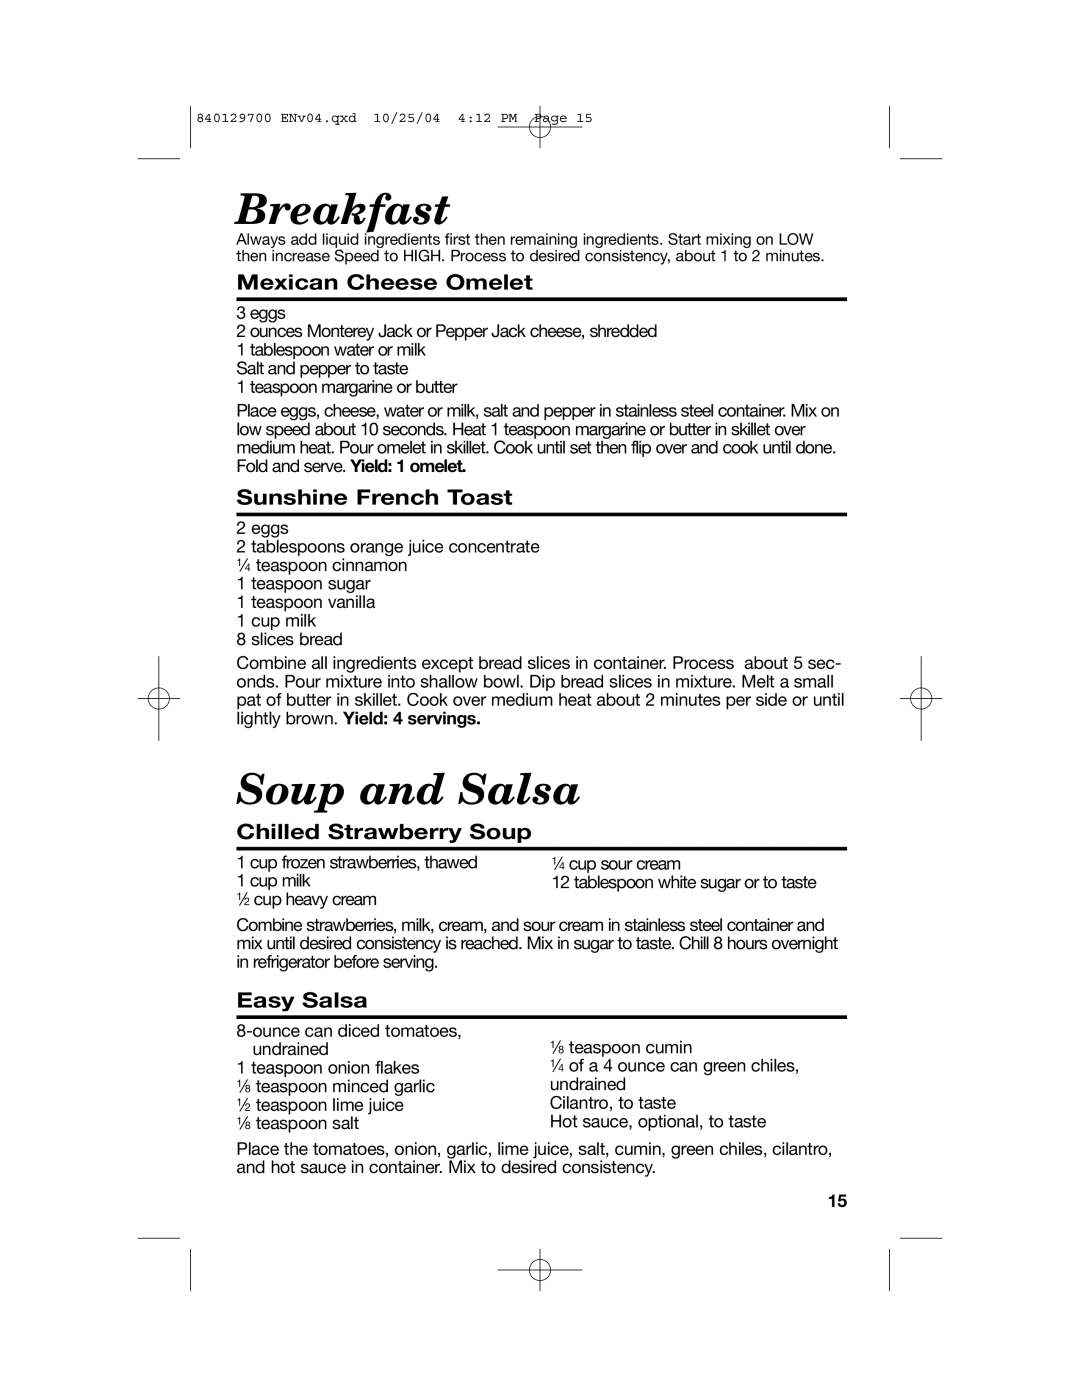 Hamilton Beach Drink Mixer manual Breakfast, Soup and Salsa, Mexican Cheese Omelet, Sunshine French Toast, Easy Salsa 